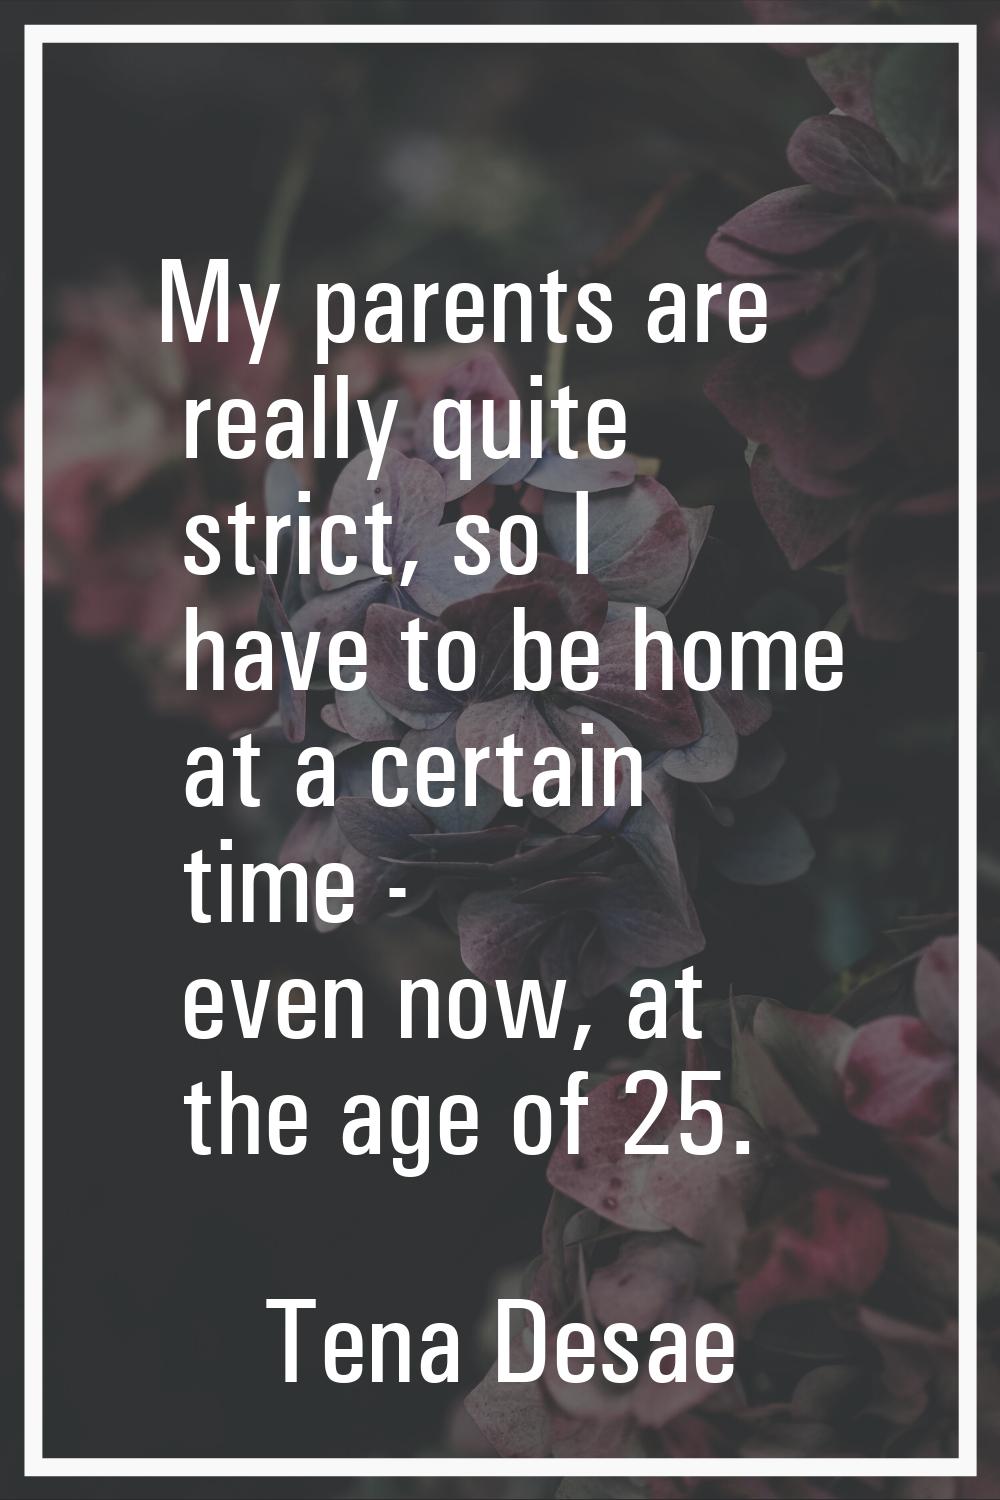 My parents are really quite strict, so I have to be home at a certain time - even now, at the age o